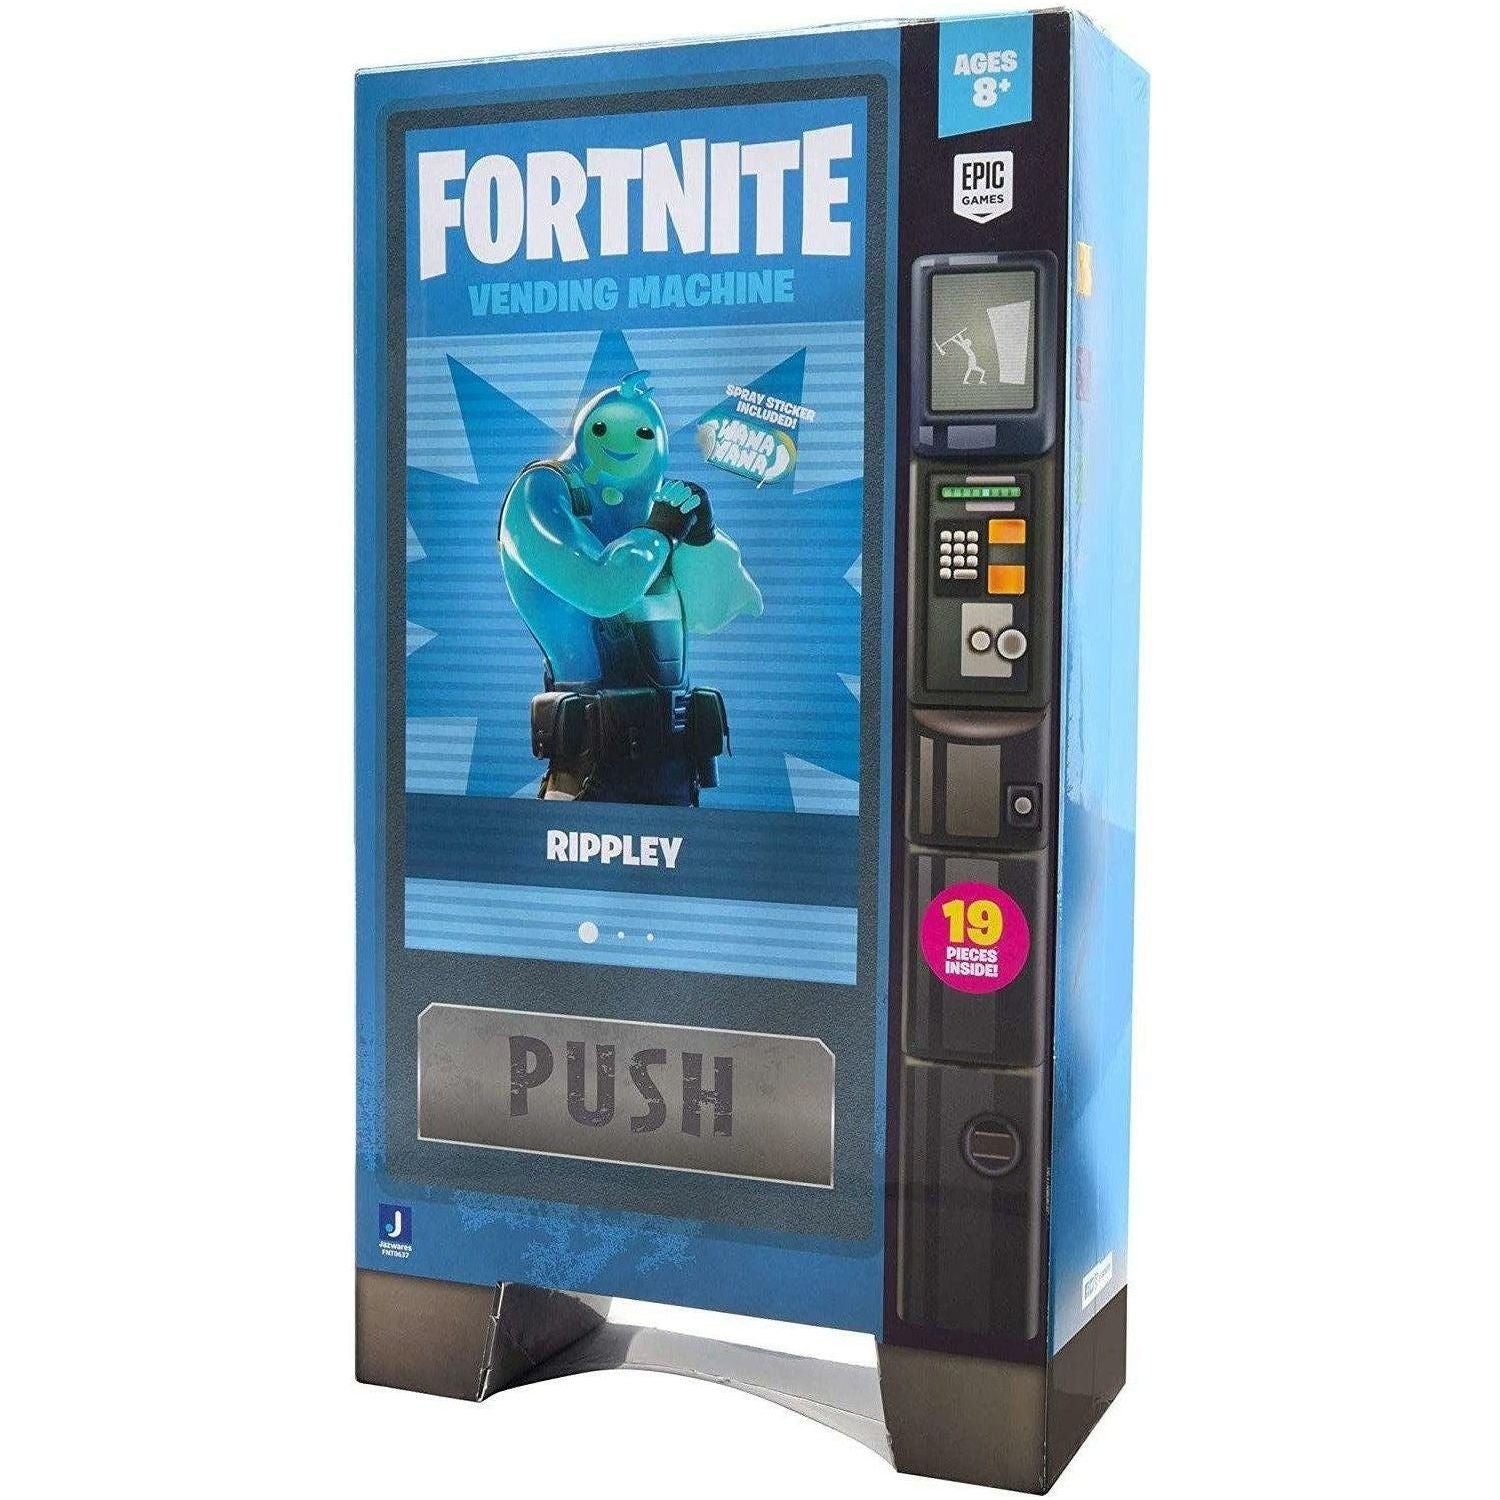 Fortnite Vending Machine, Includes Highly-Detailed and Articulated 4-inch Rippley Figure - BumbleToys - 8+ Years, Action Battling, Boys, OXE, Rippley